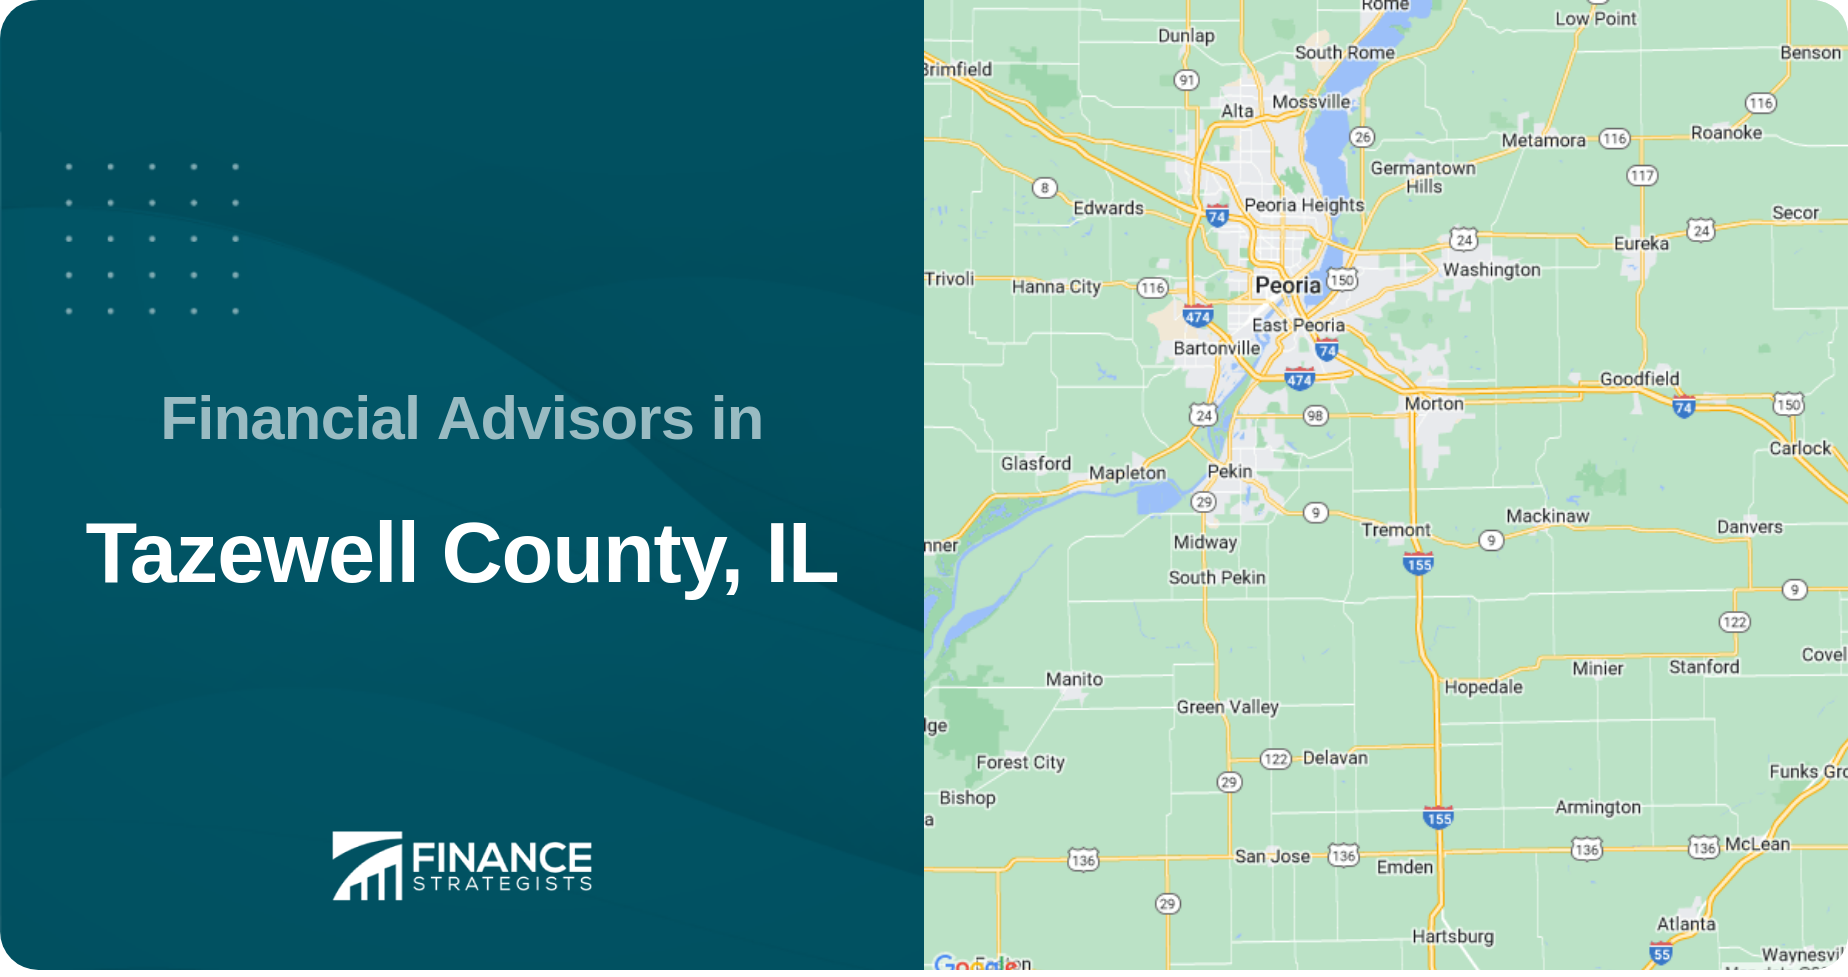 Financial Advisors in Tazewell County, IL